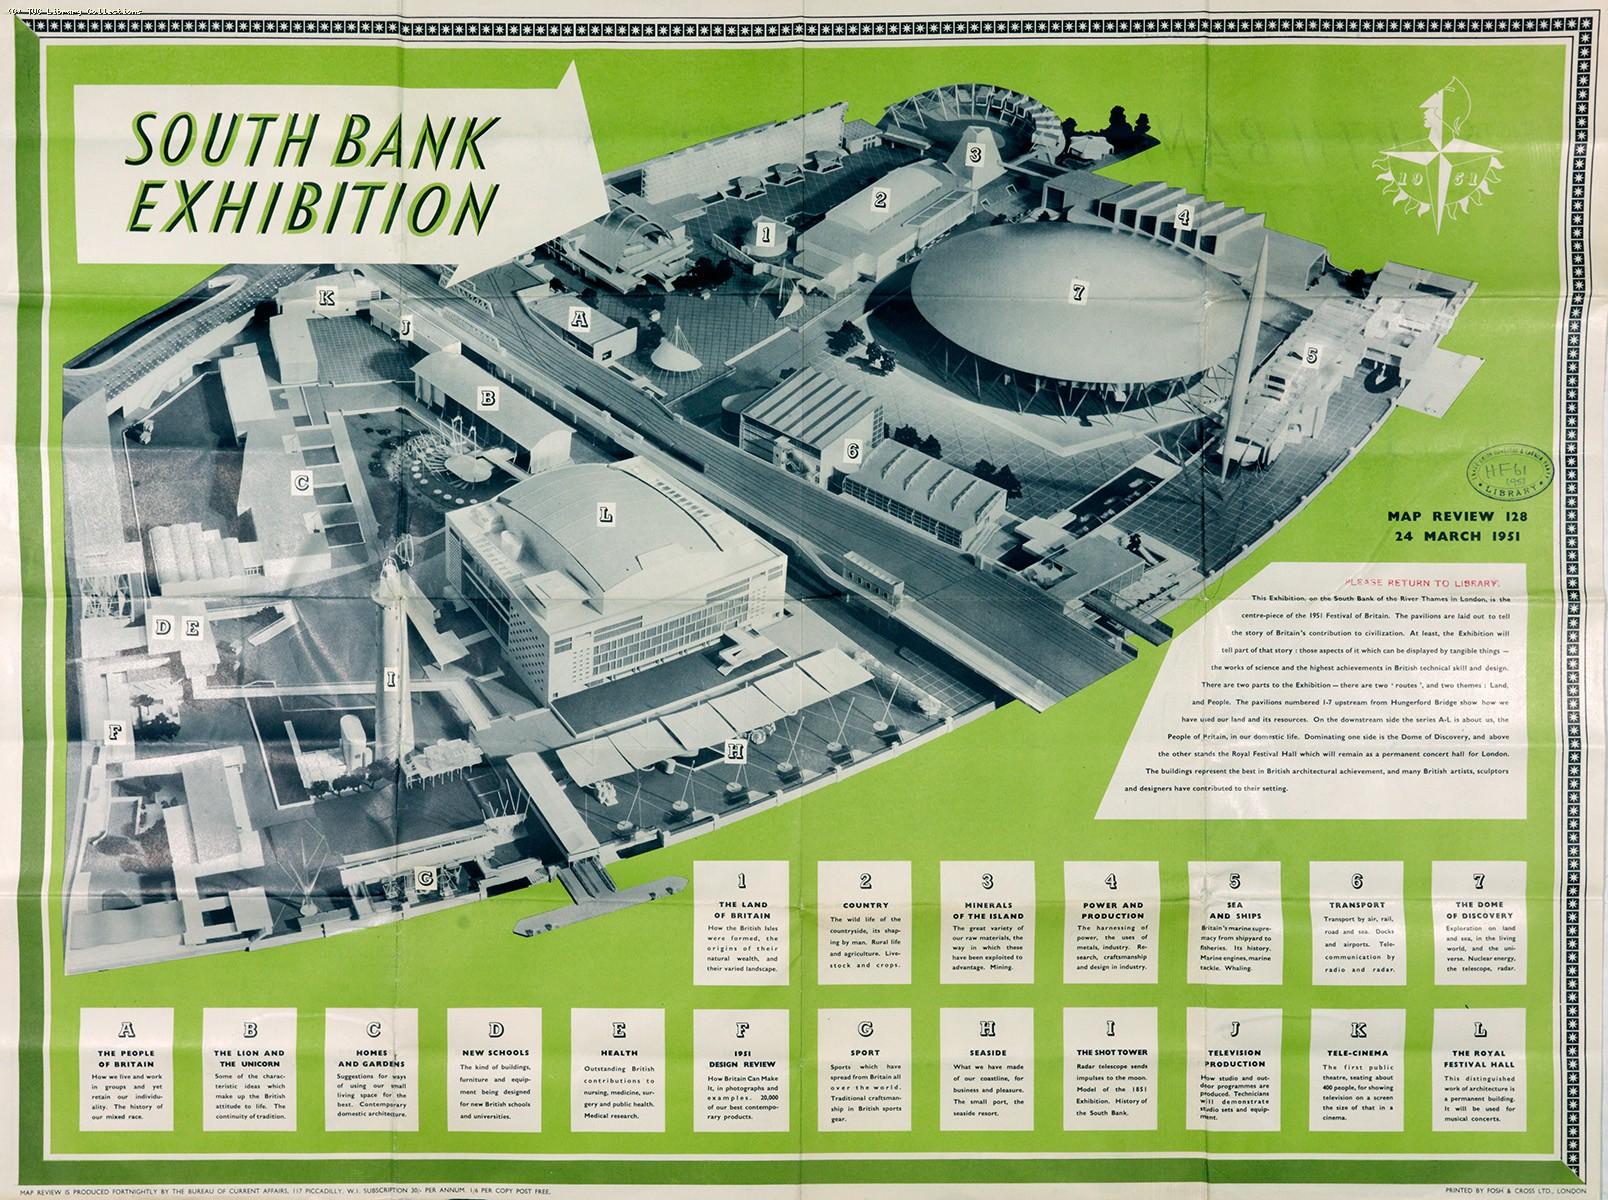 South Bank Exhibition - poster, 1951